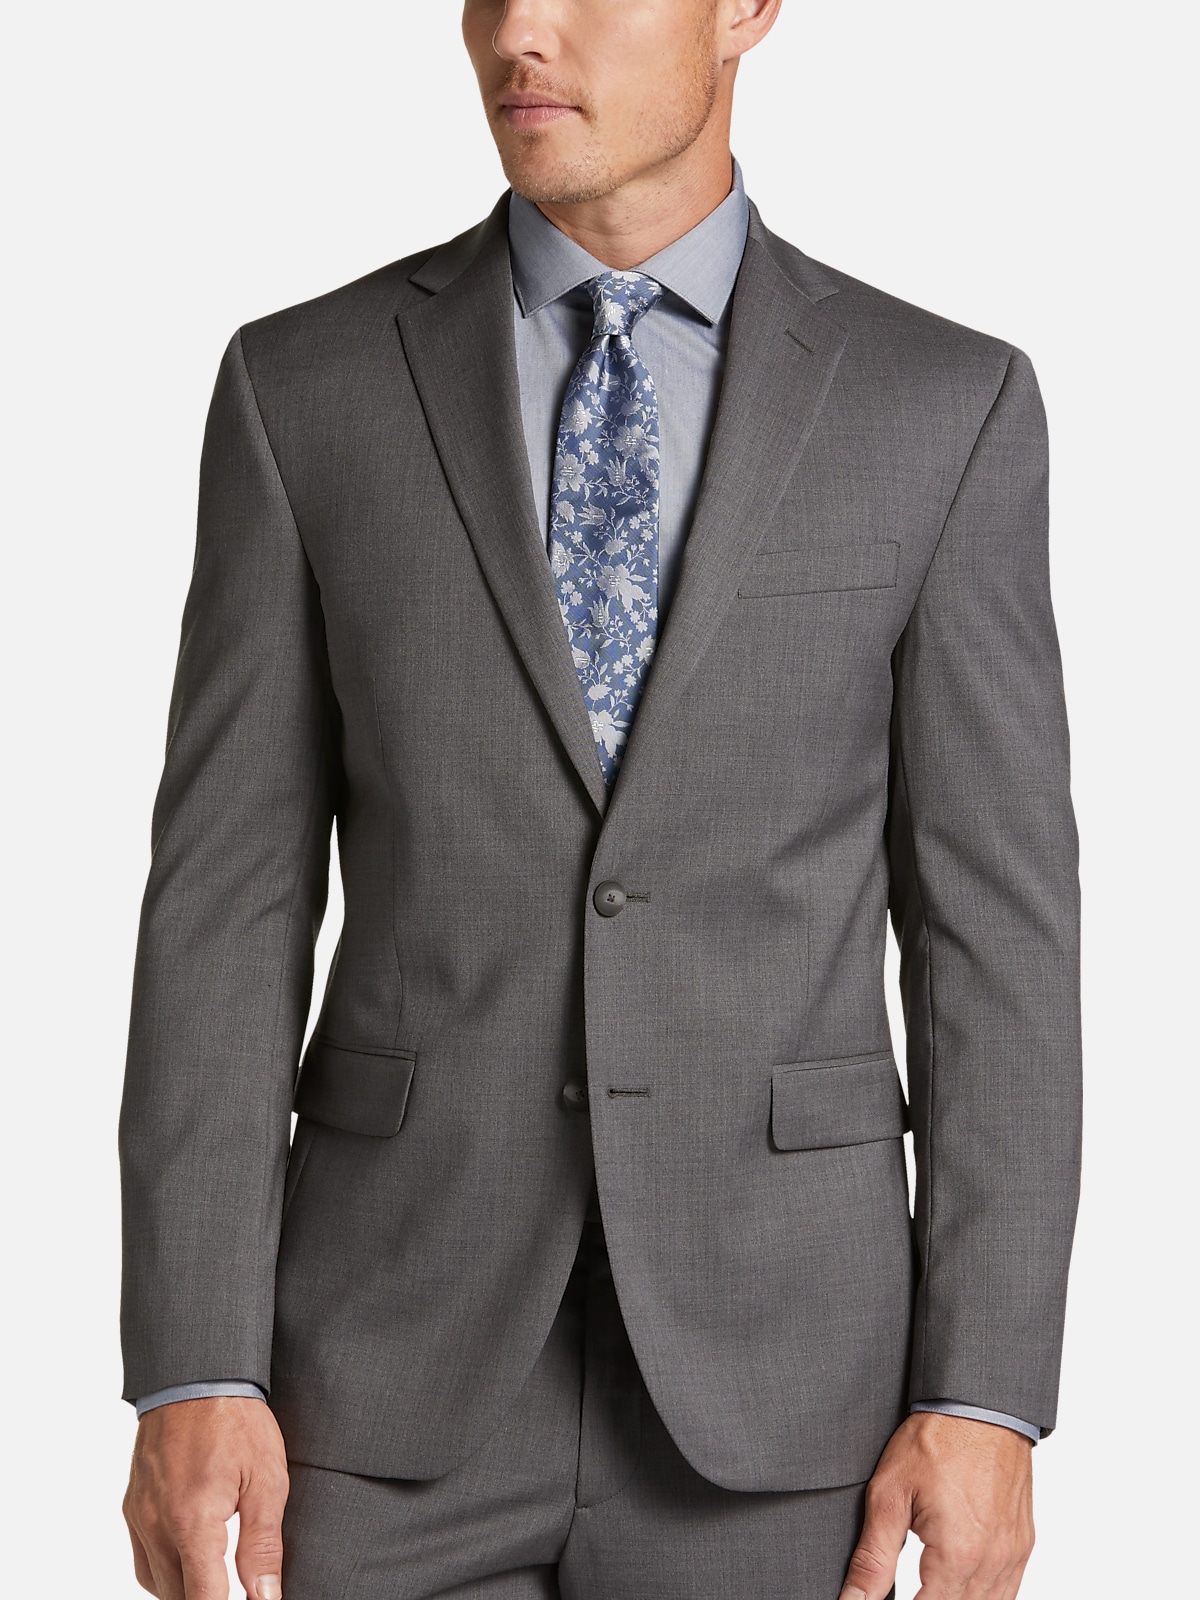 Awearness Kenneth Cole AWEAR-TECH Slim Fit Suit Separates Jacket | All ...